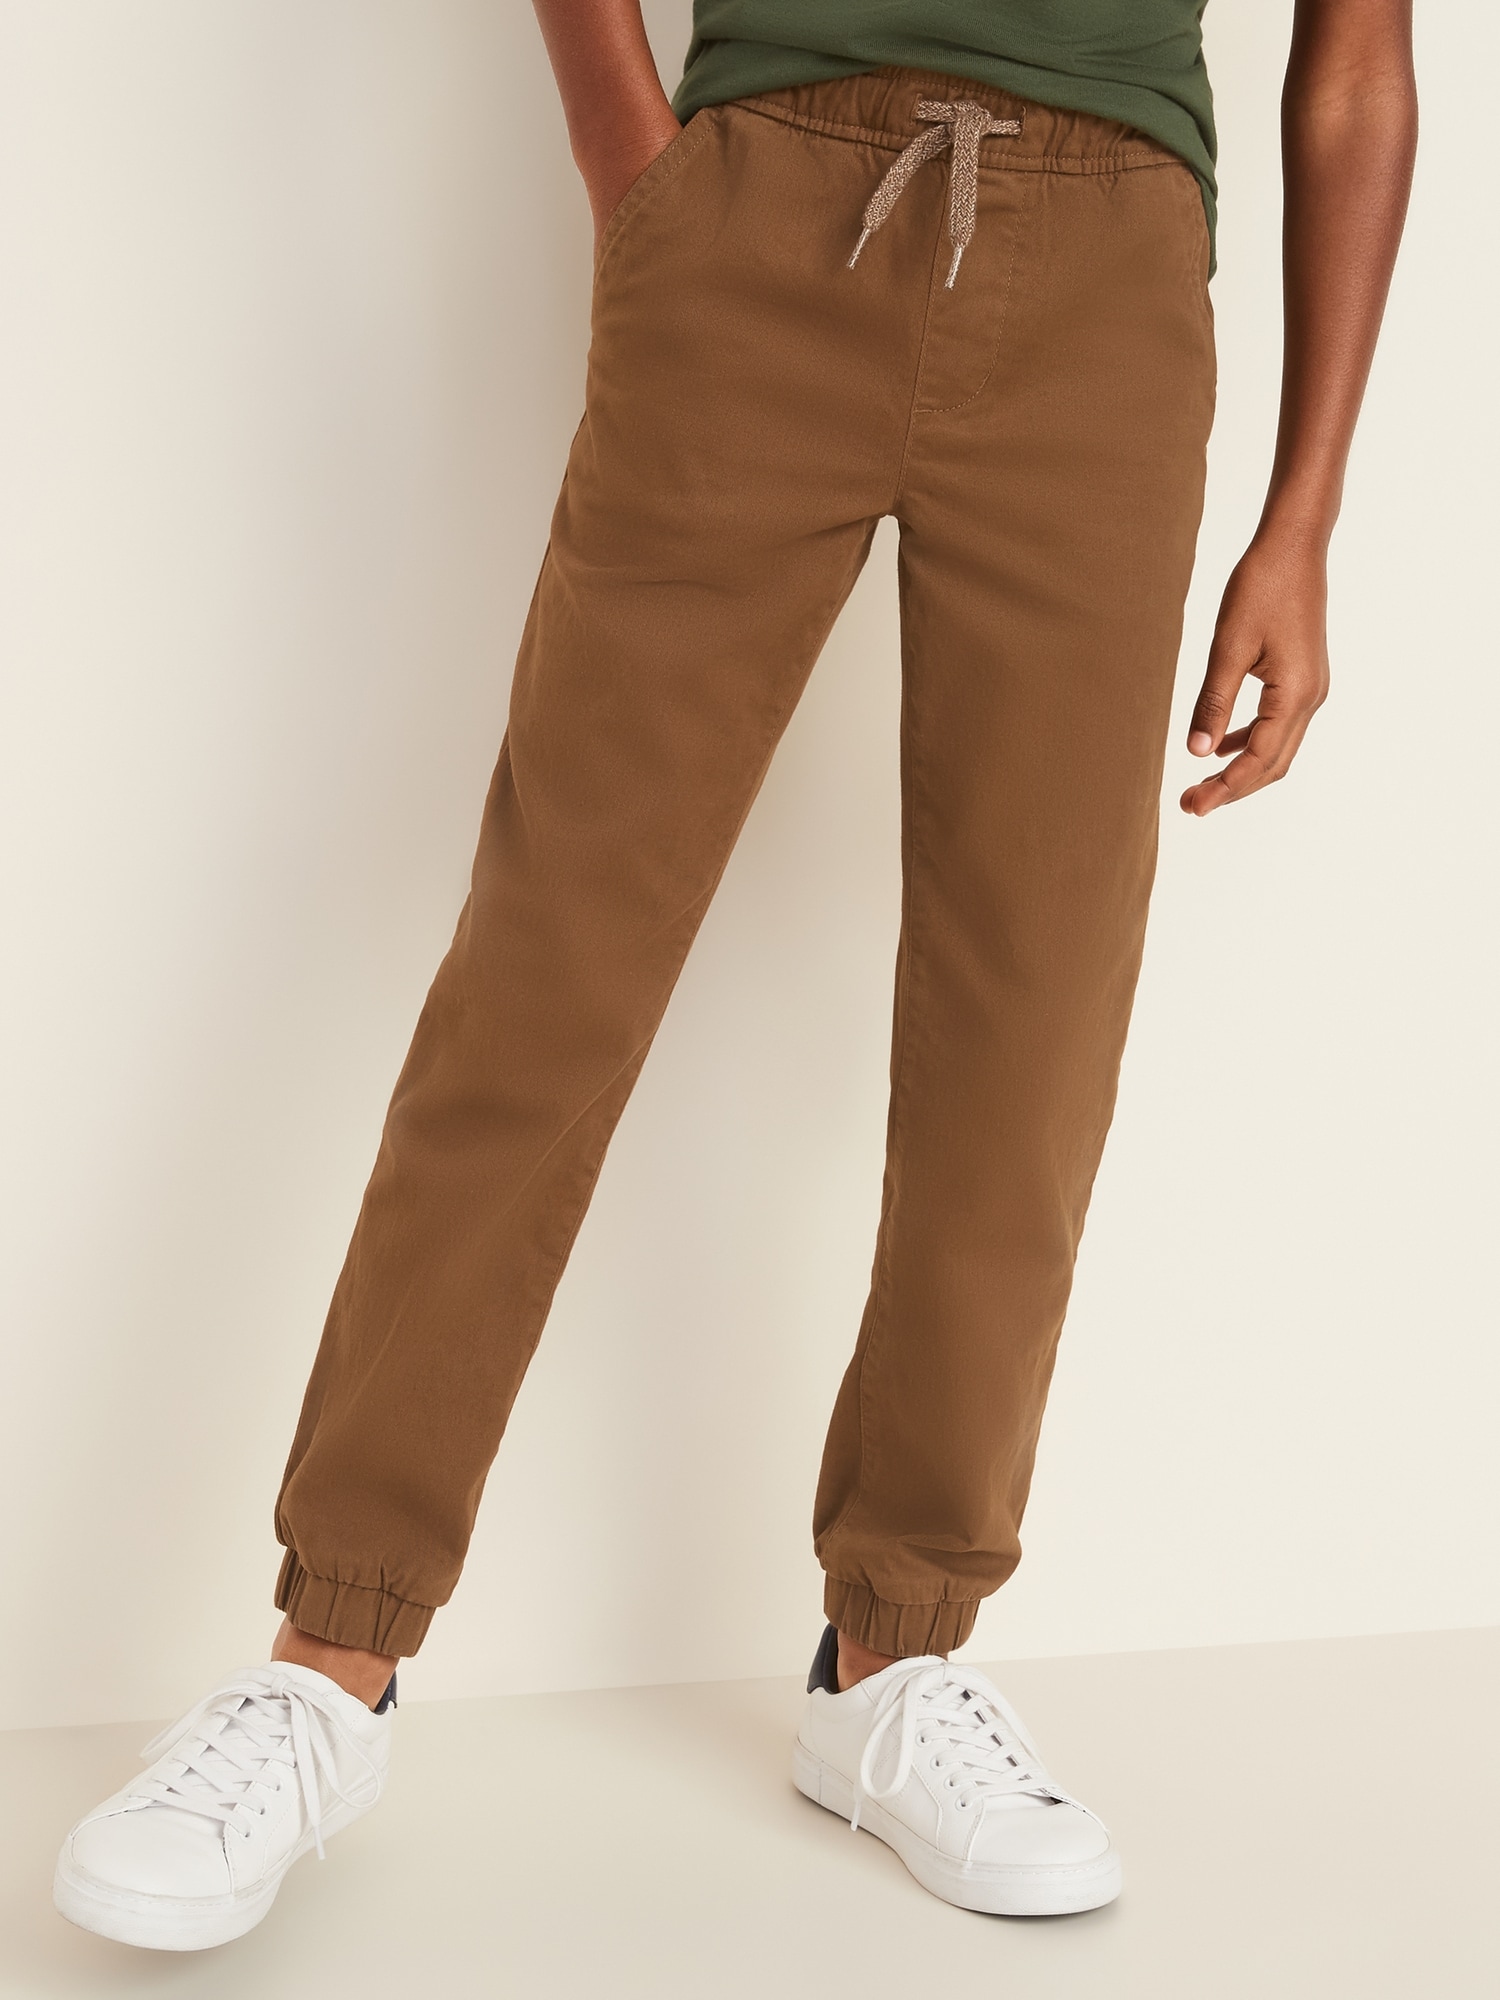 old navy twill joggers